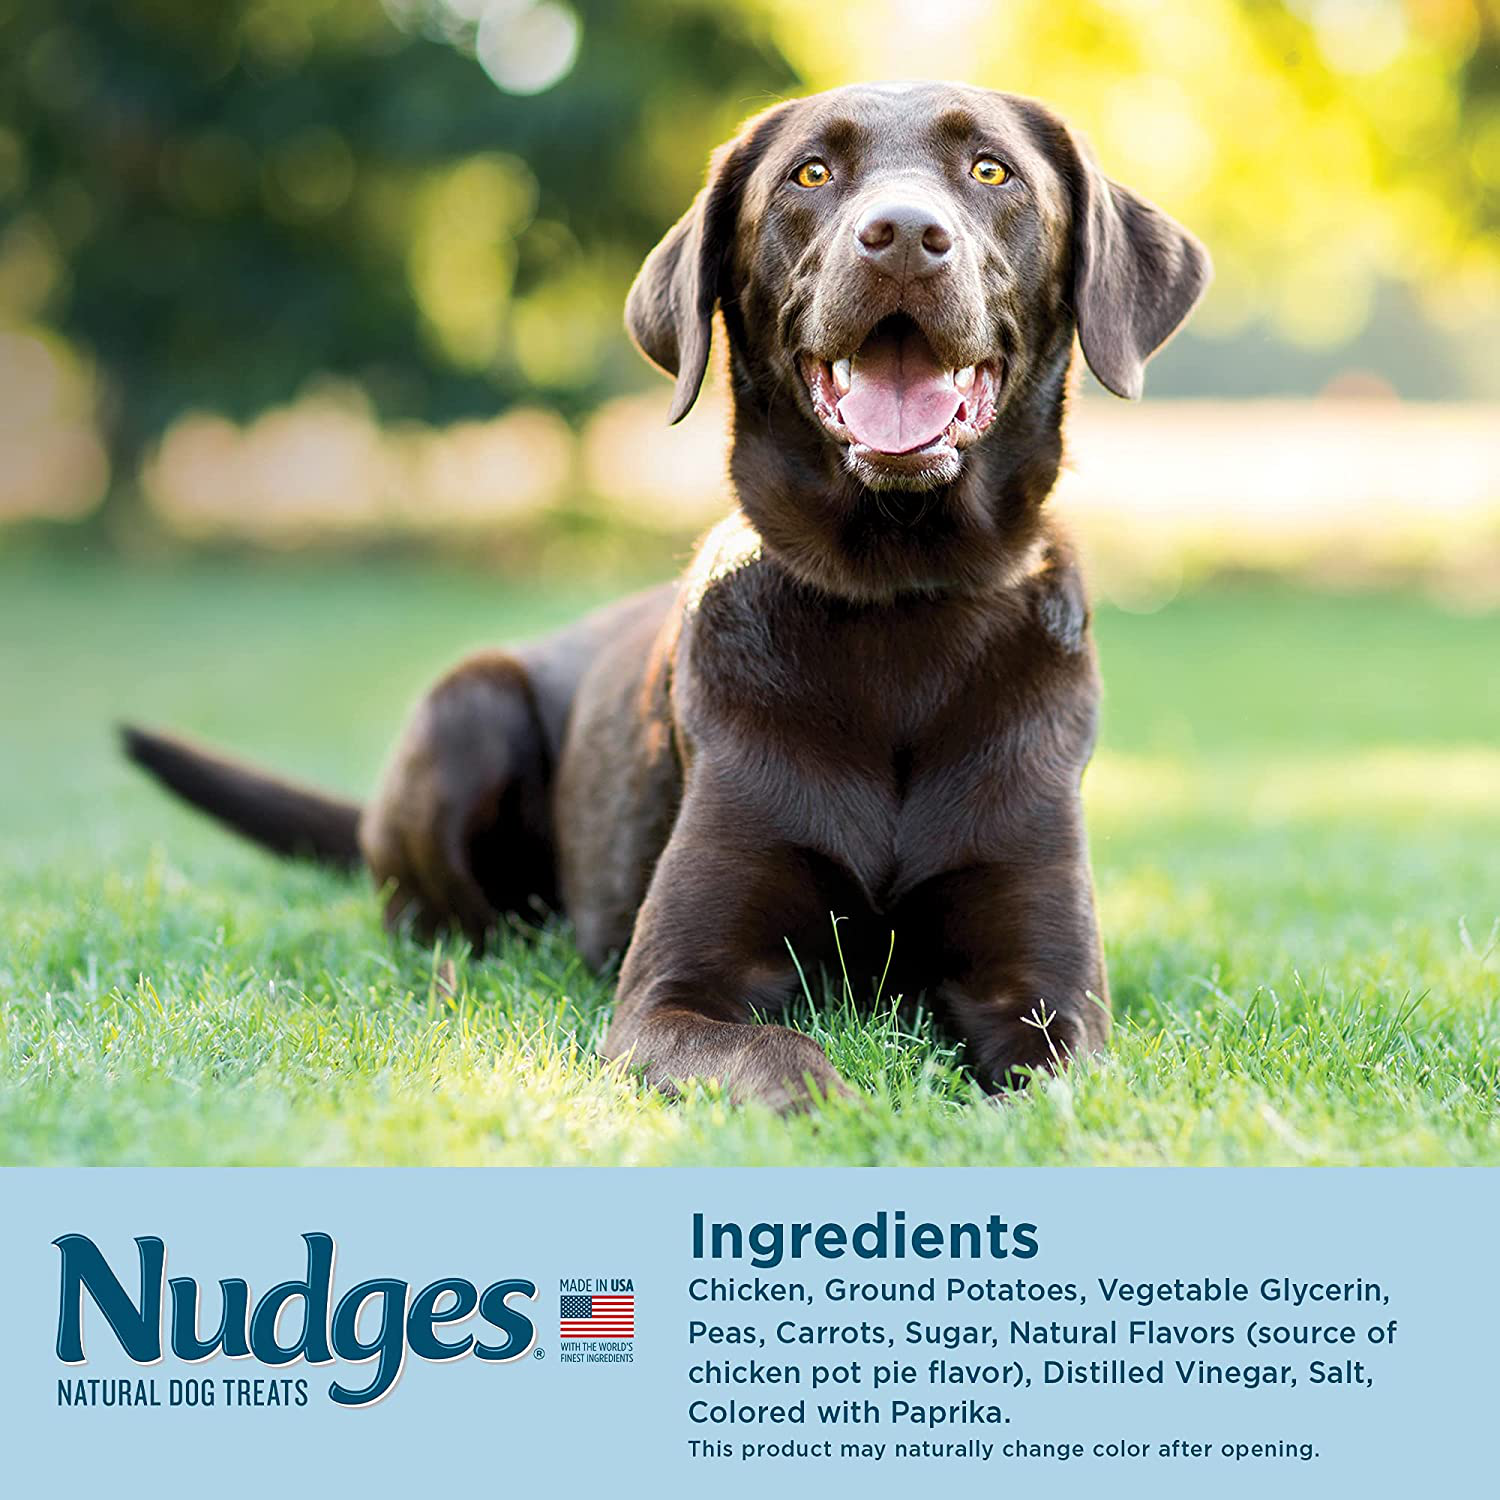 Nudges Natural Dog Treats Homestyle Made with Real Chicken, Peas, and Carrots Animals & Pet Supplies > Pet Supplies > Dog Supplies > Dog Treats Nudges   